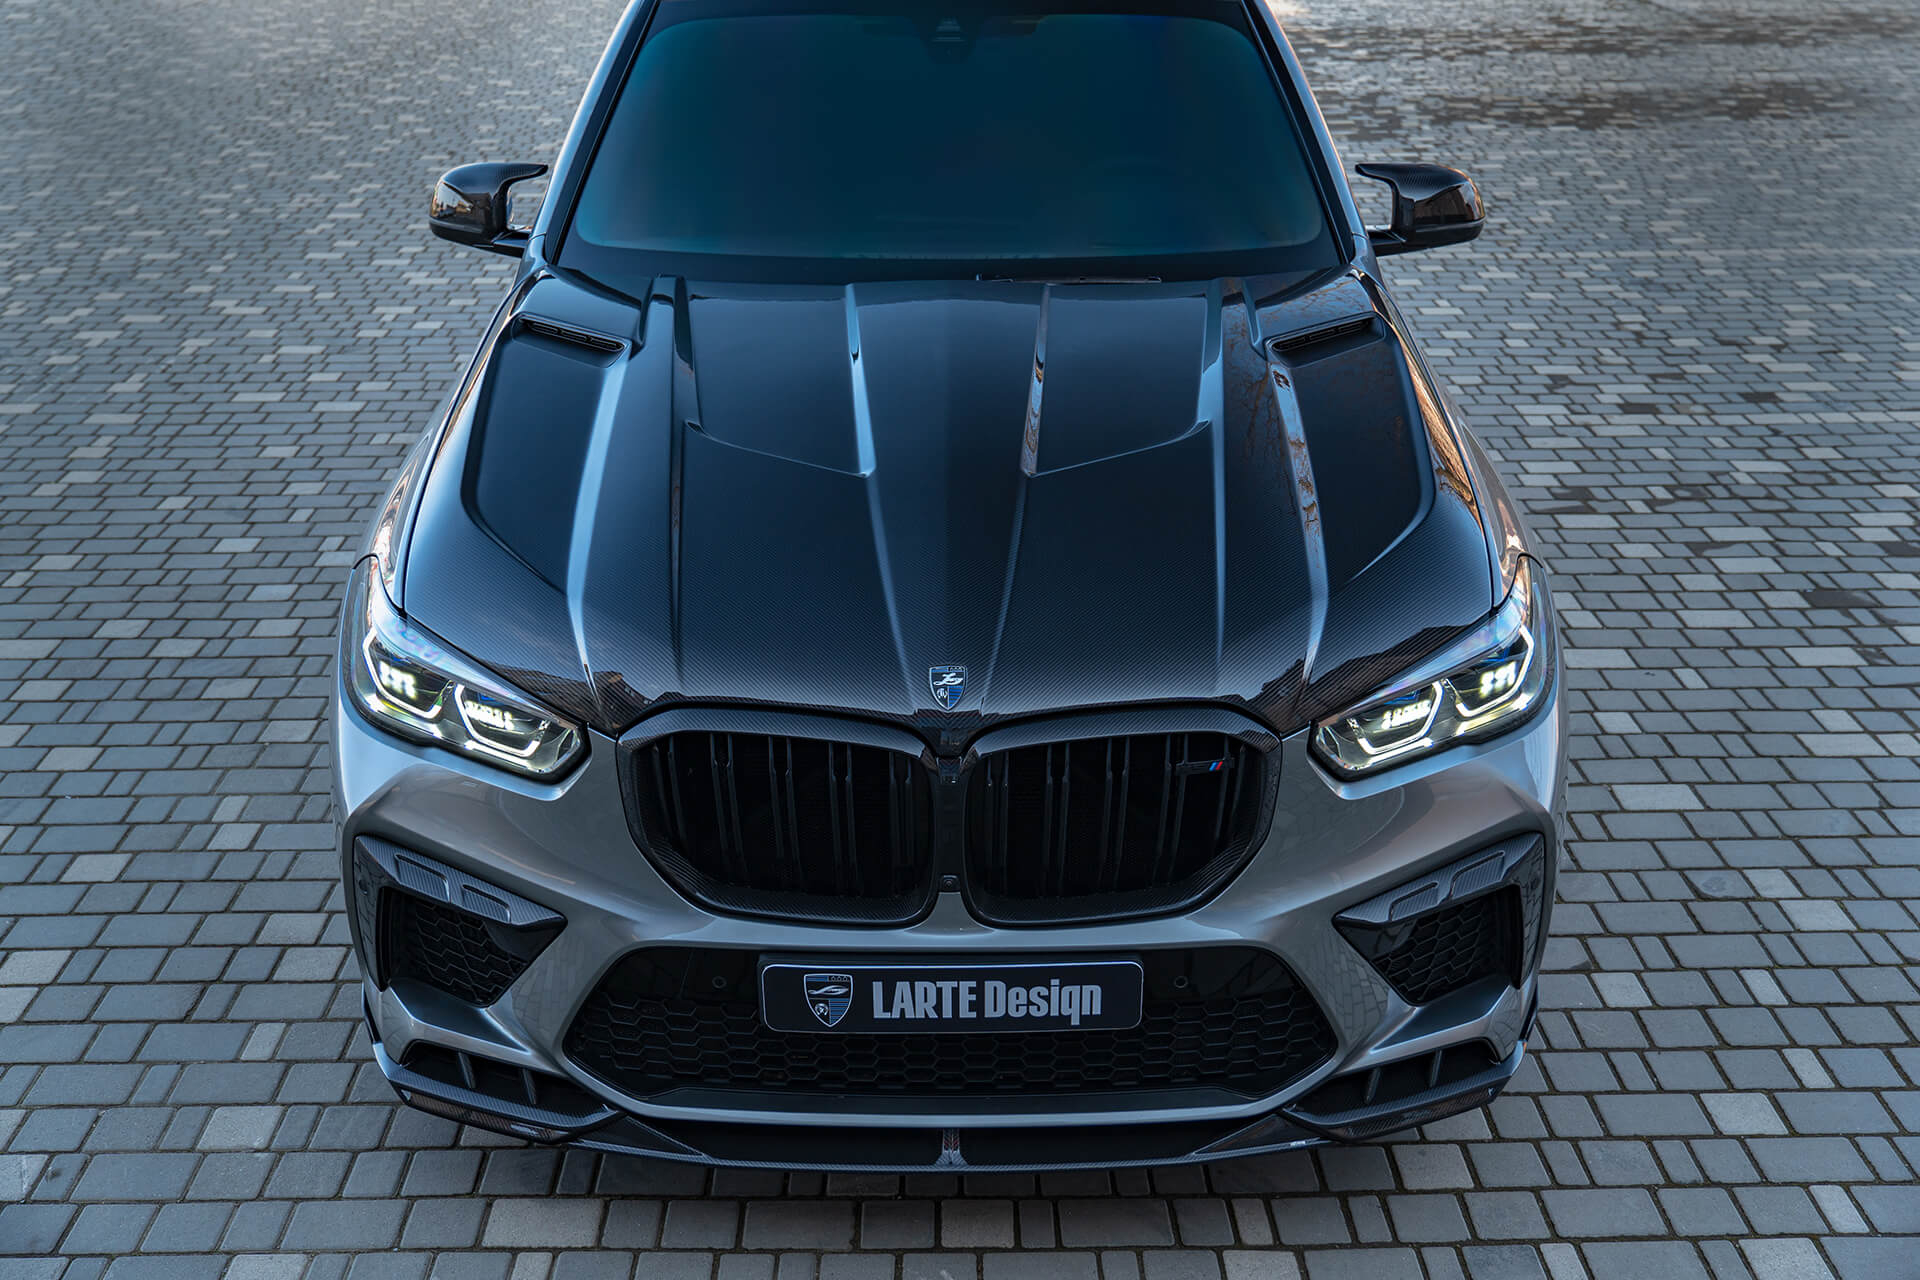 Check our price and buy Larte Design carbon fiber body kit set for BMW X5 M F95!